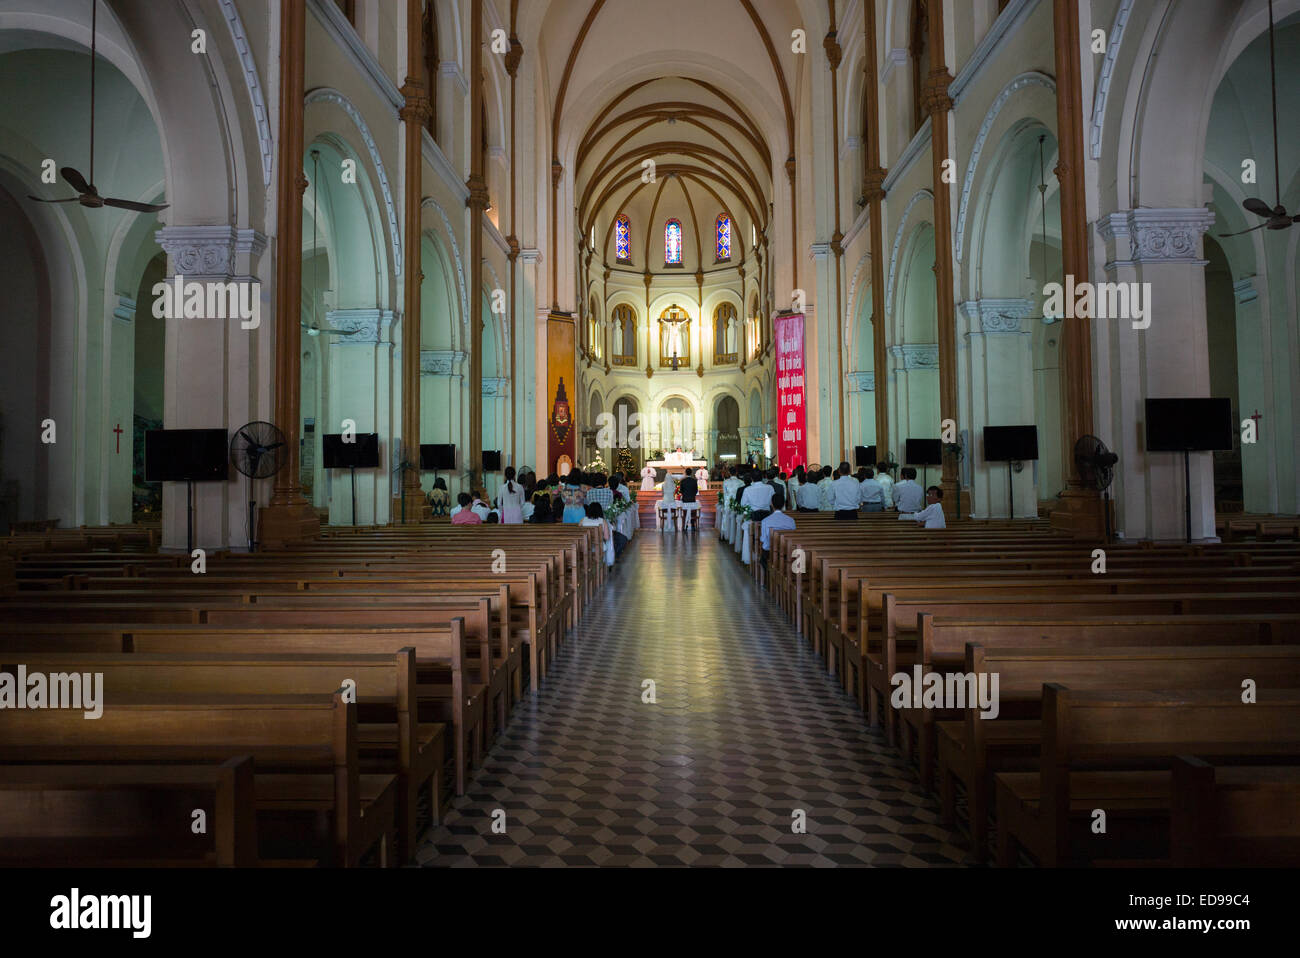 Basilica of Our Lady of the Immaculate Conception, Ho Chi Minh, Vietnam. Stock Photo